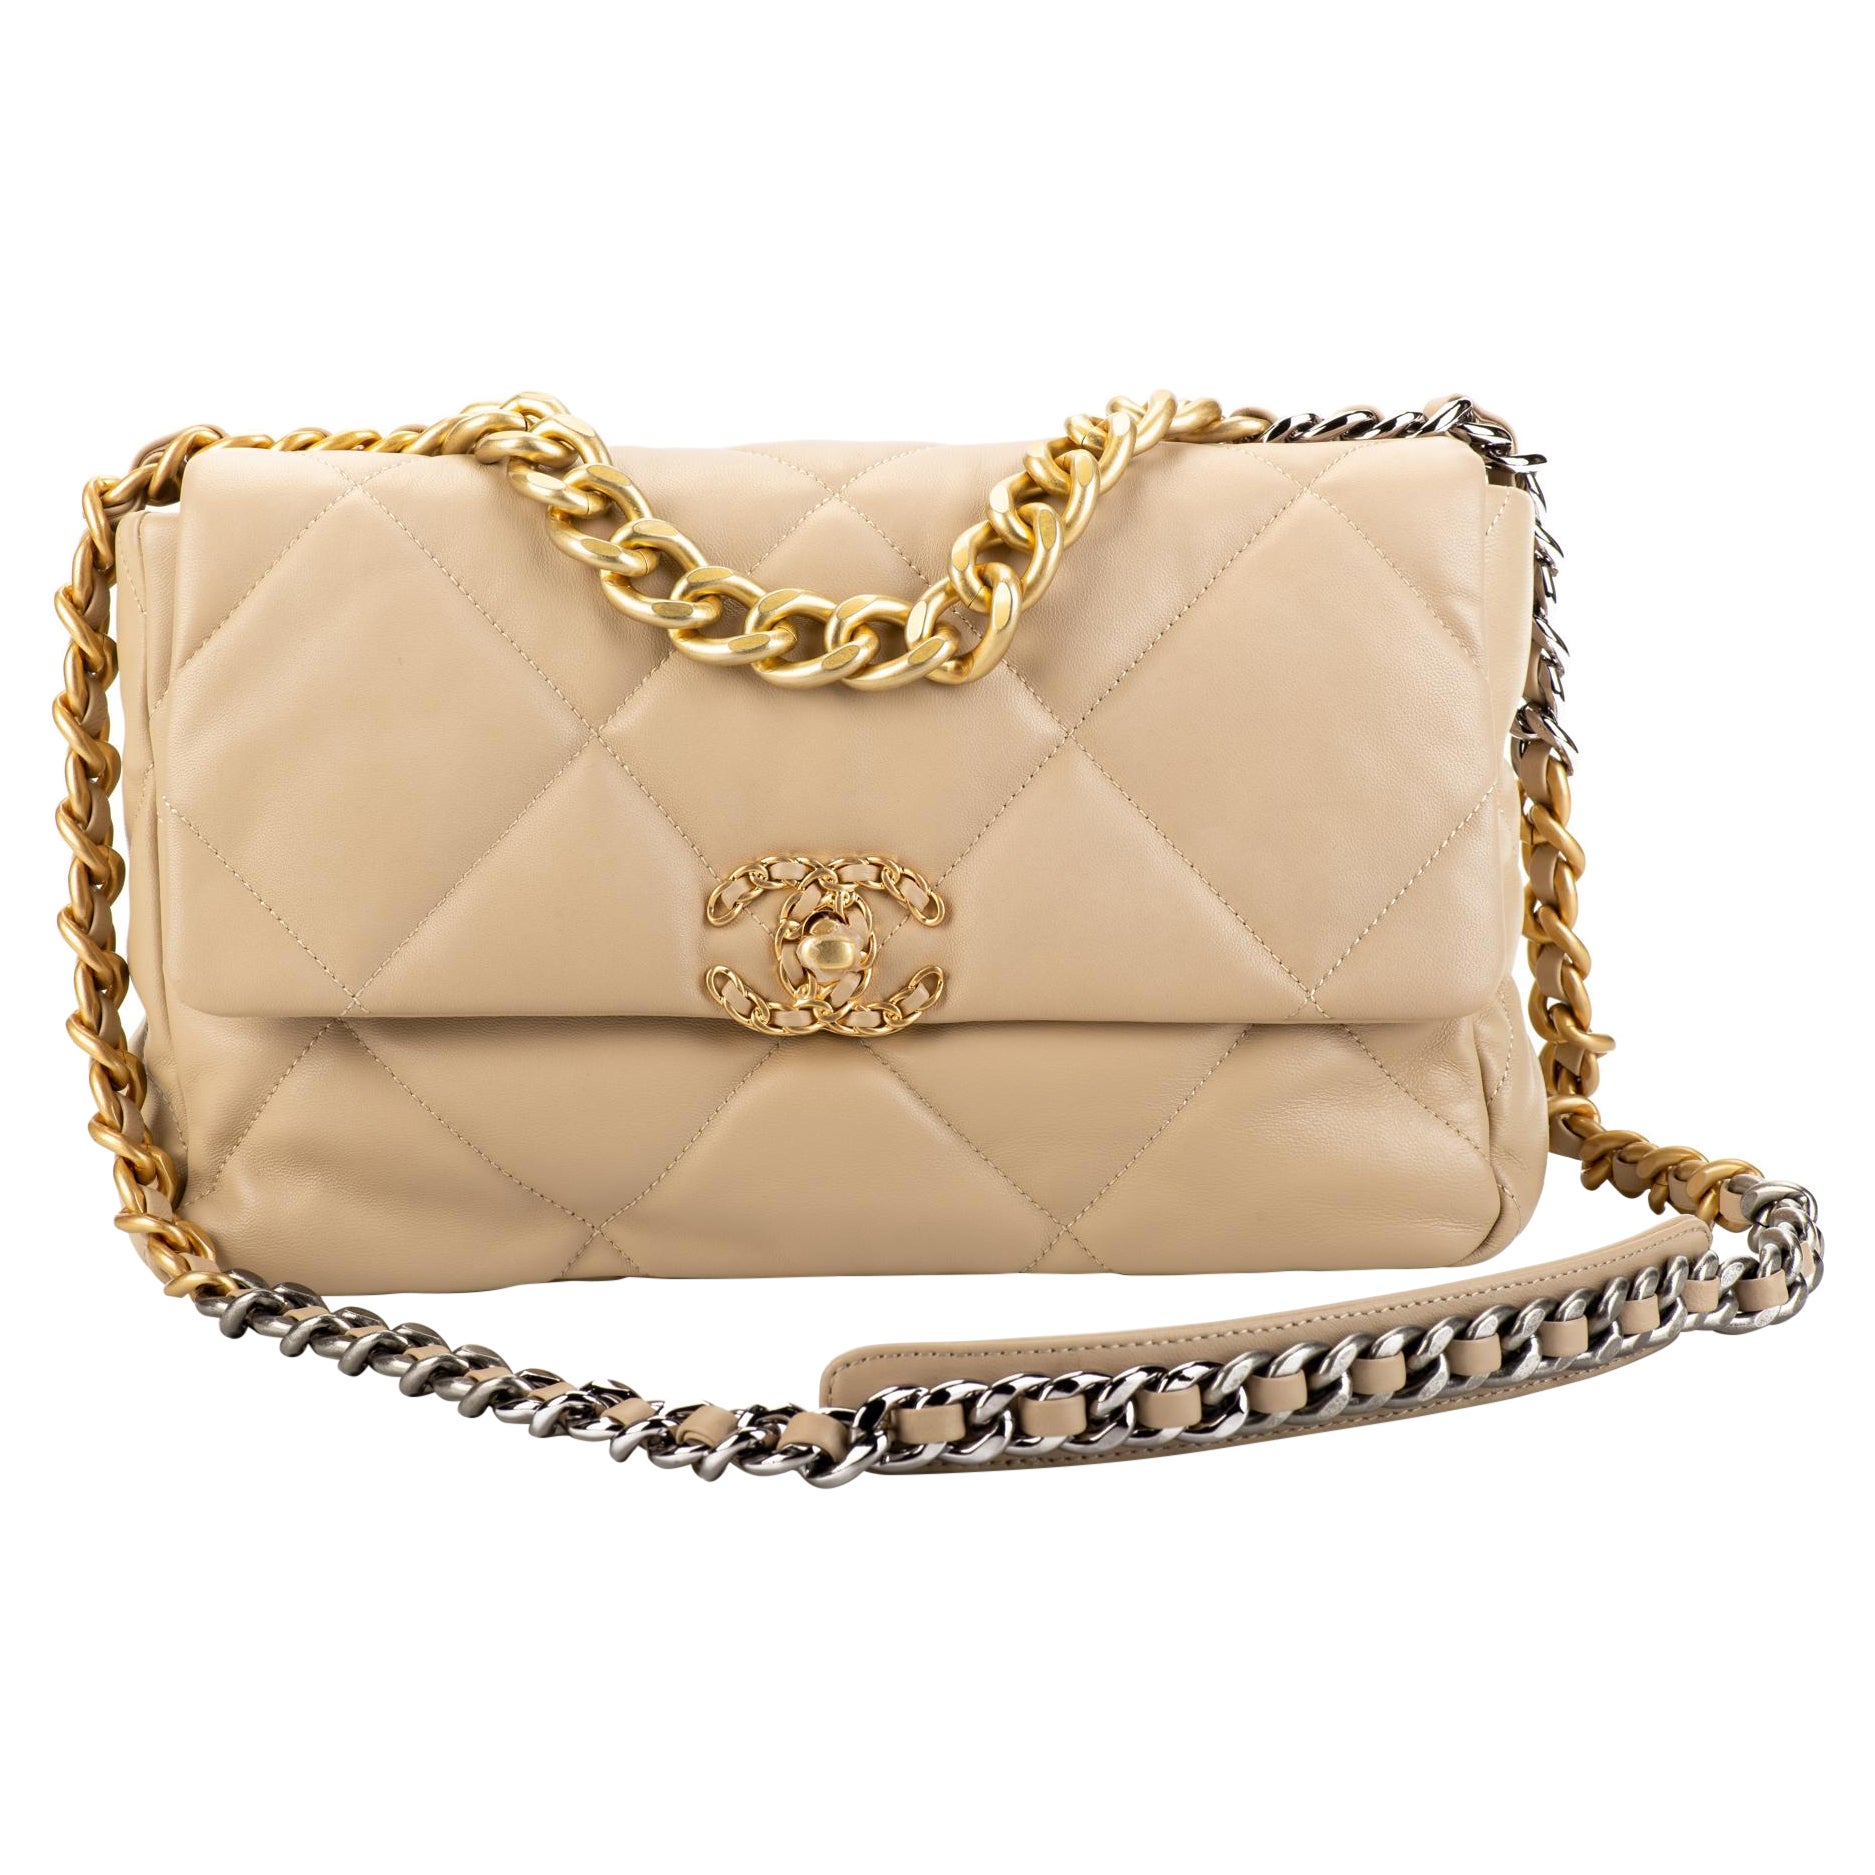 New Chanel Rare Quilted Beige 19 Bag 